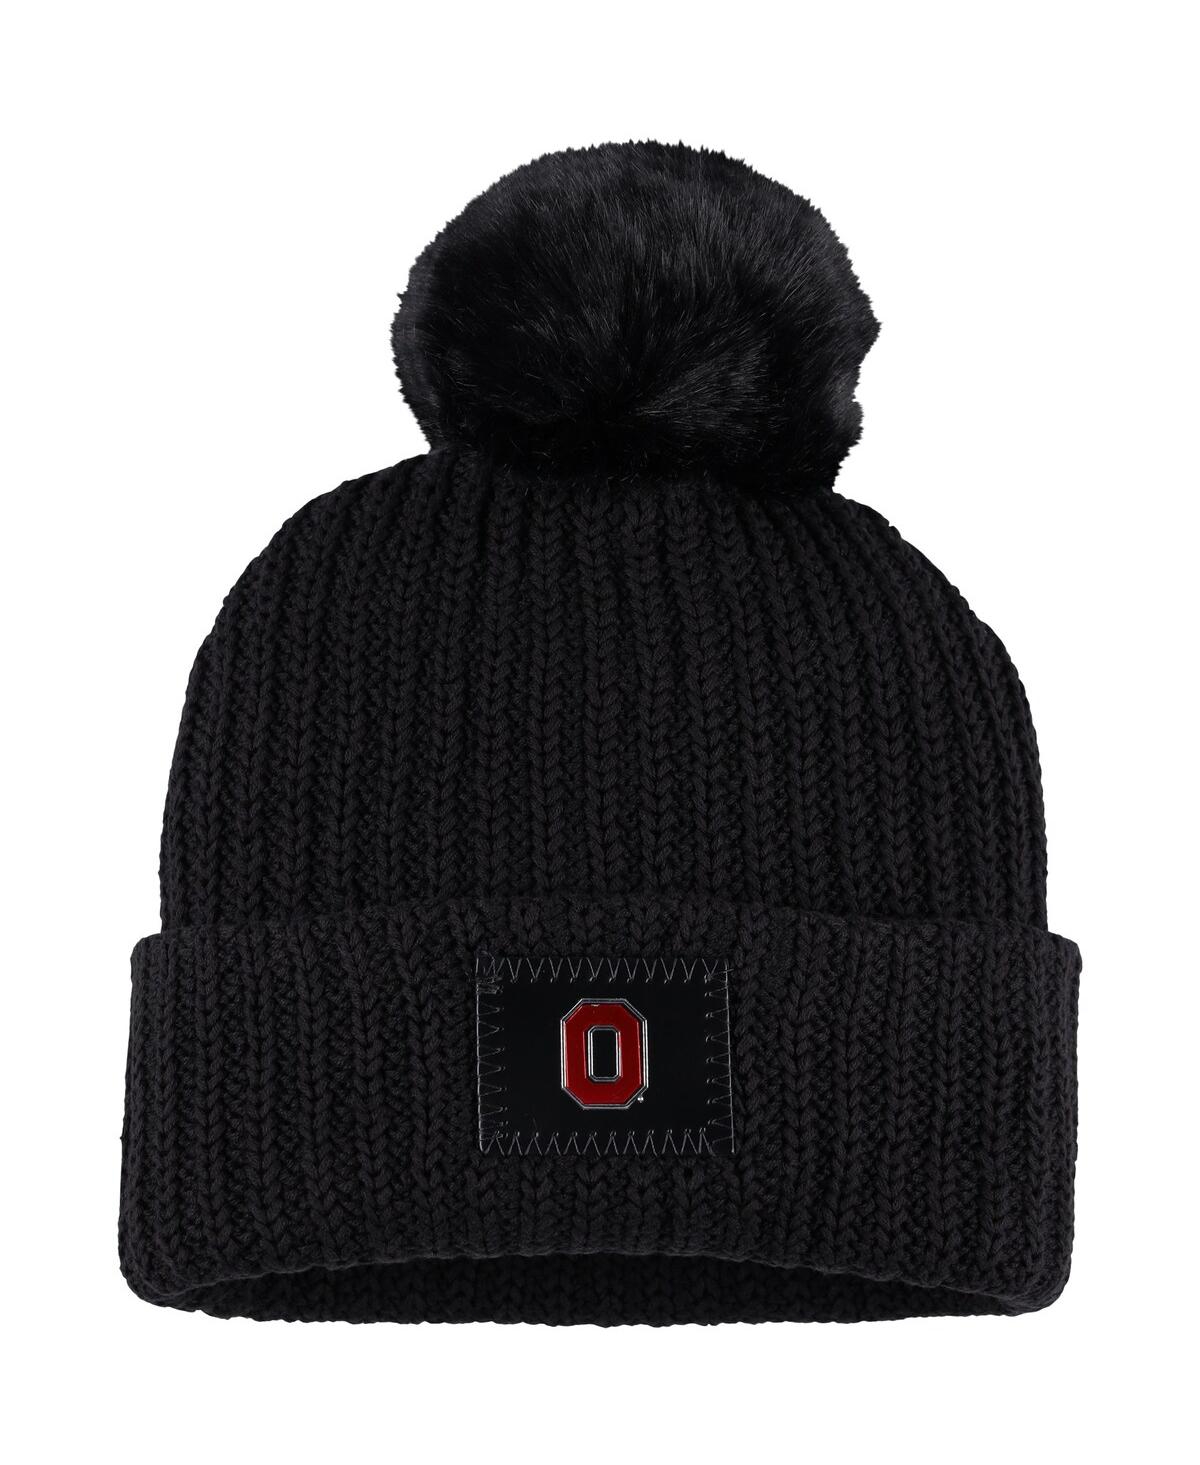 Women's Love Your Melon Black Ohio State Buckeyes Cuffed Knit Hat with Pom - Black